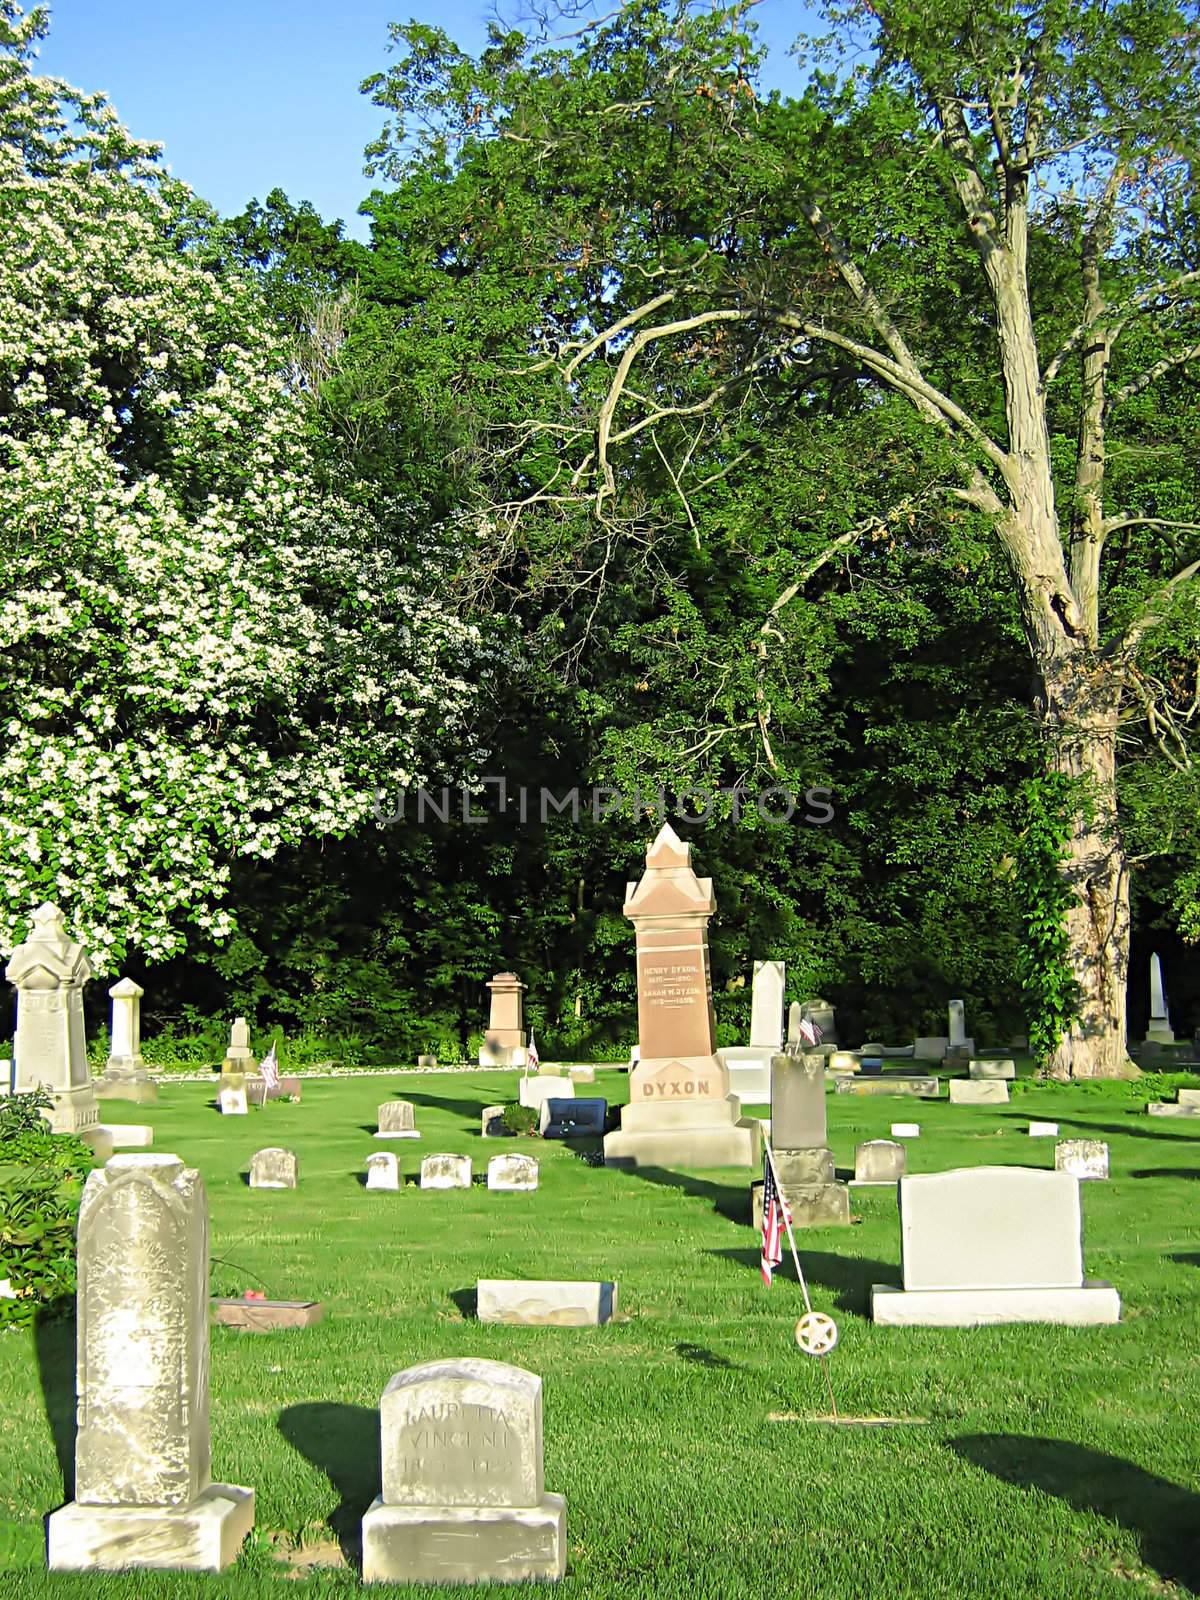 A photograph of a peaceful old cemetery.